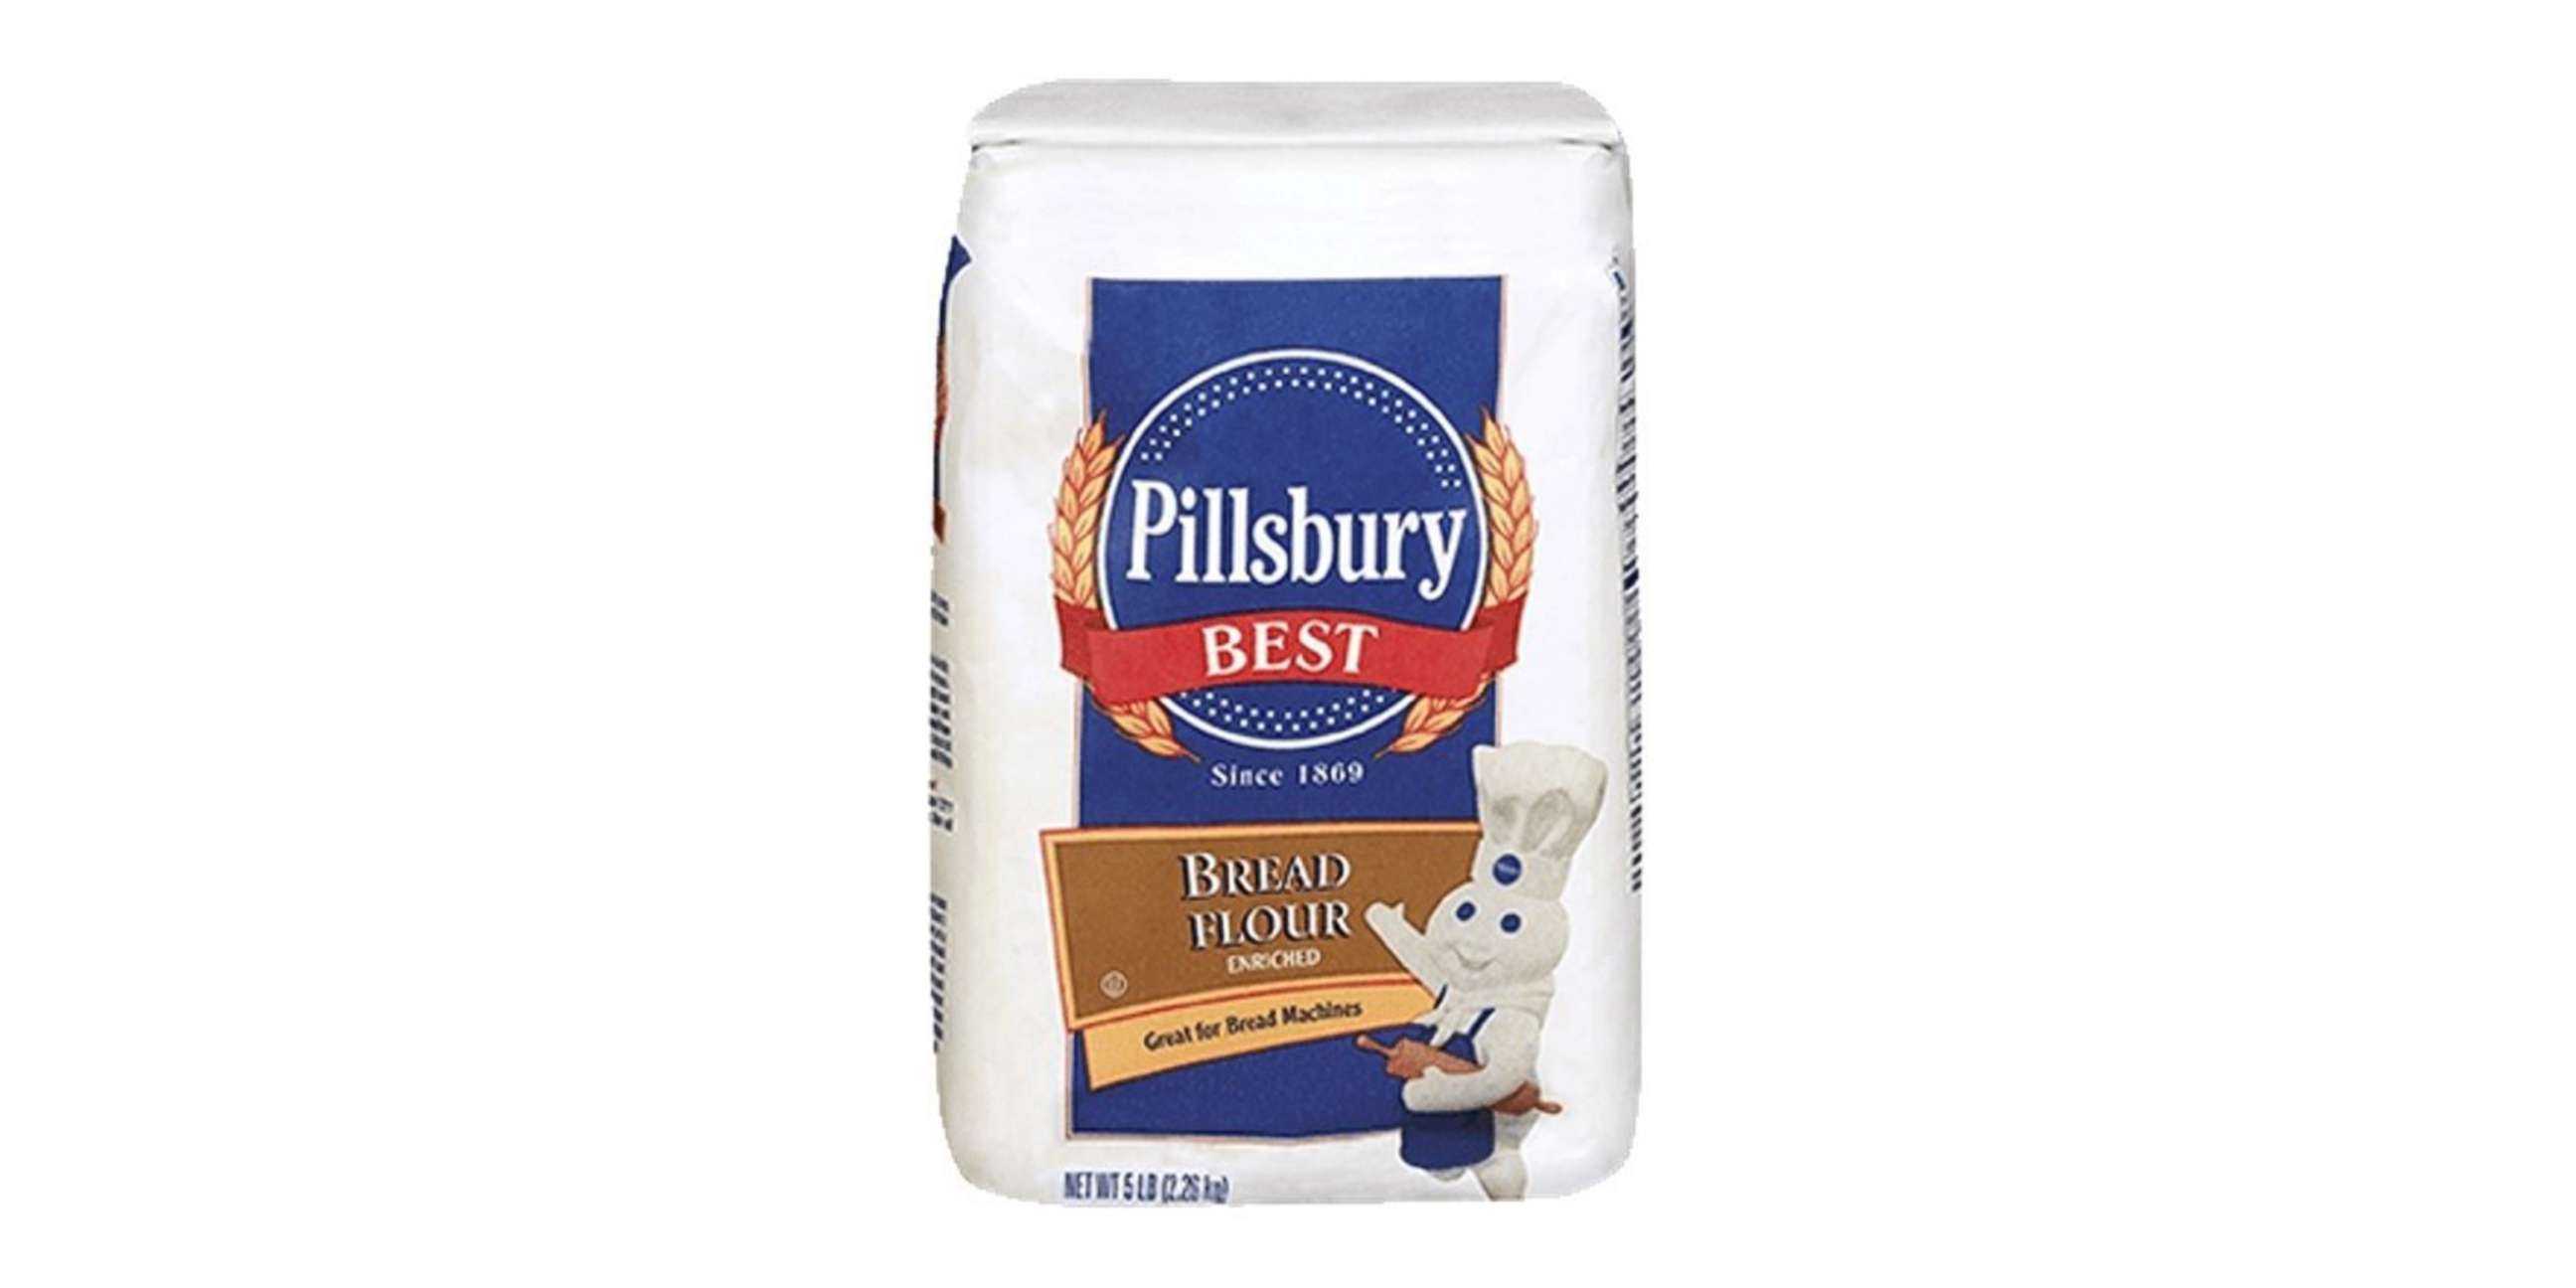 PHOTO: Hometown Food Company and ADM Milling have announced a recall of some of their Pillsbury Bes